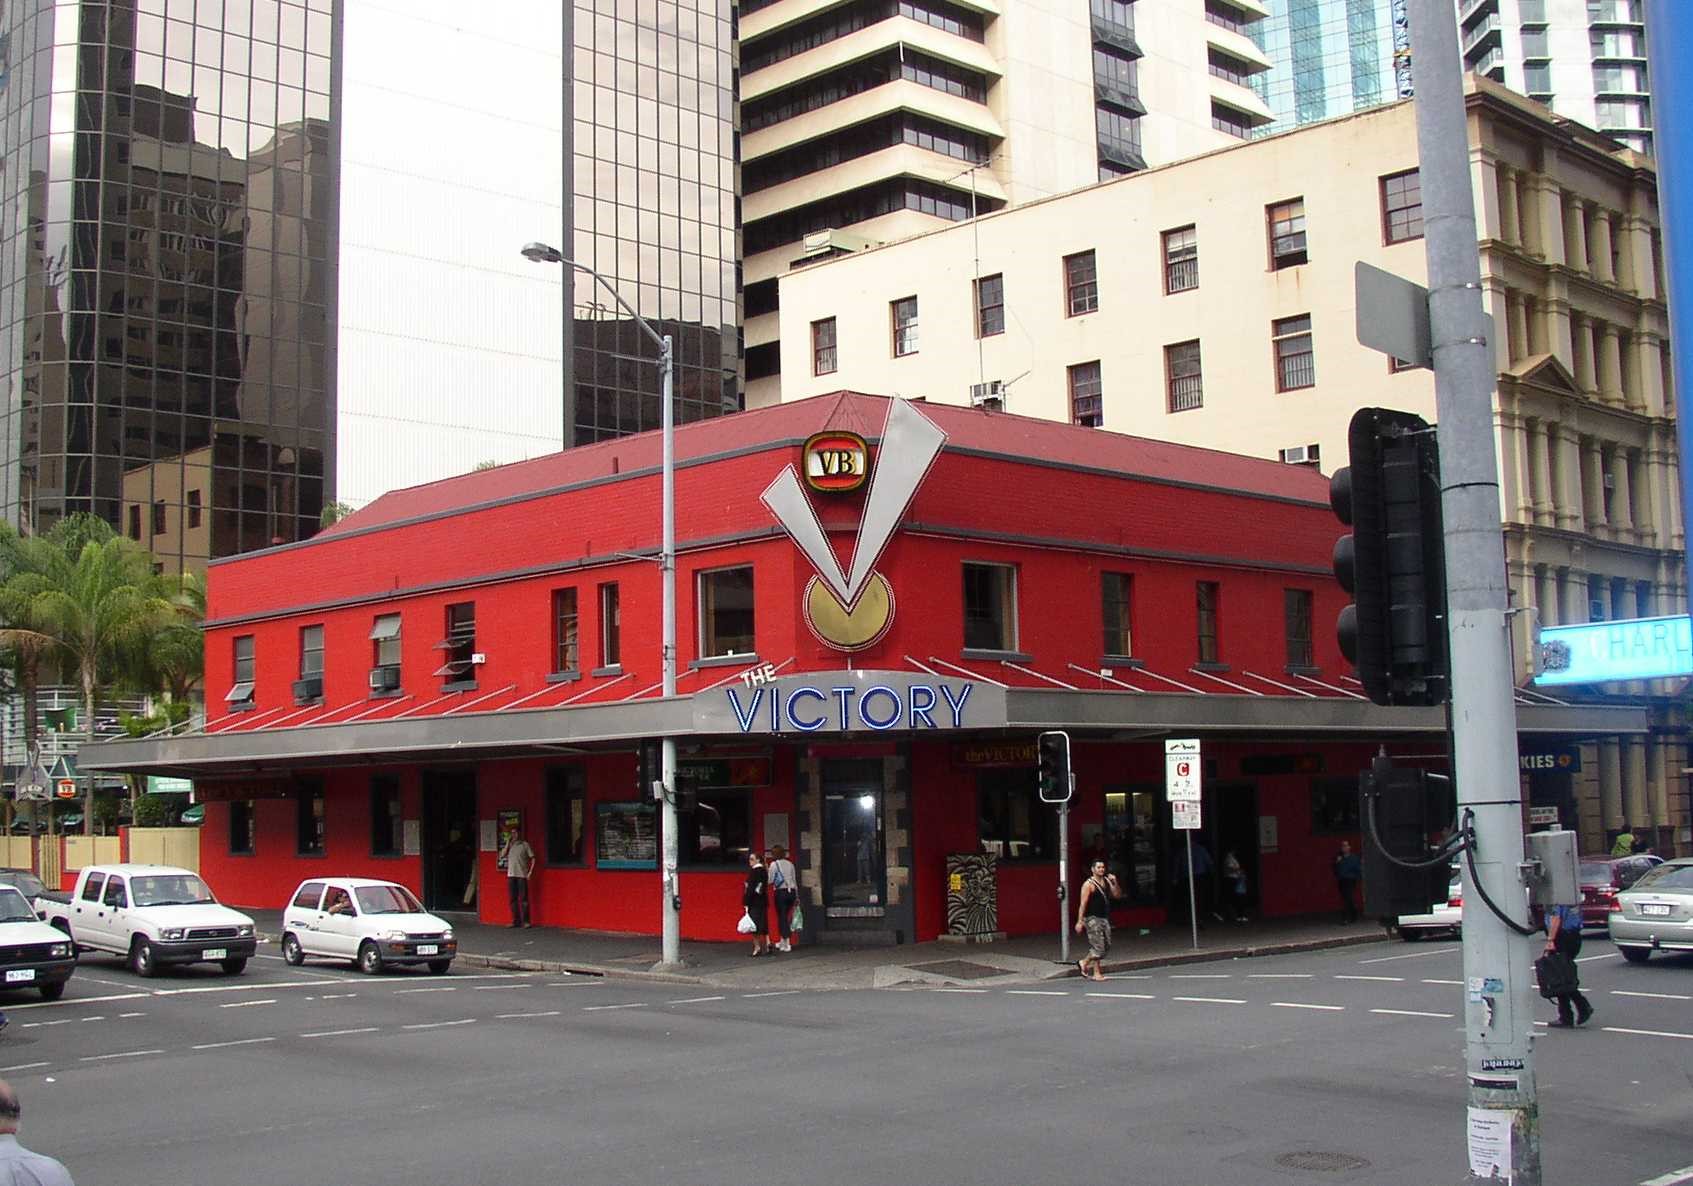 This is an image of the local heritage place known as Victory Hotel